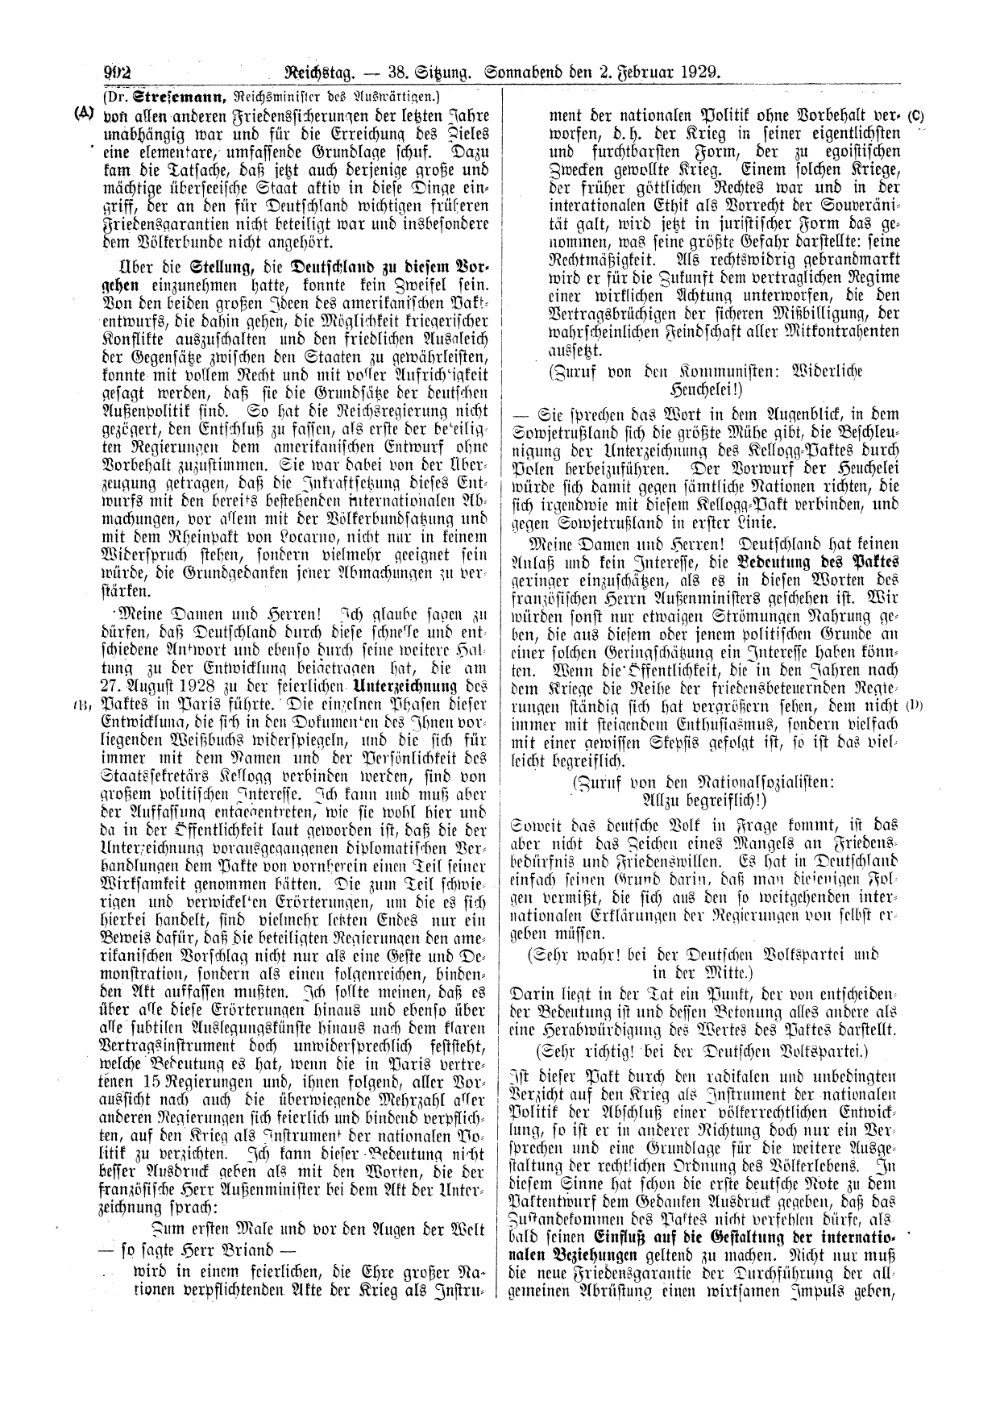 Scan of page 992